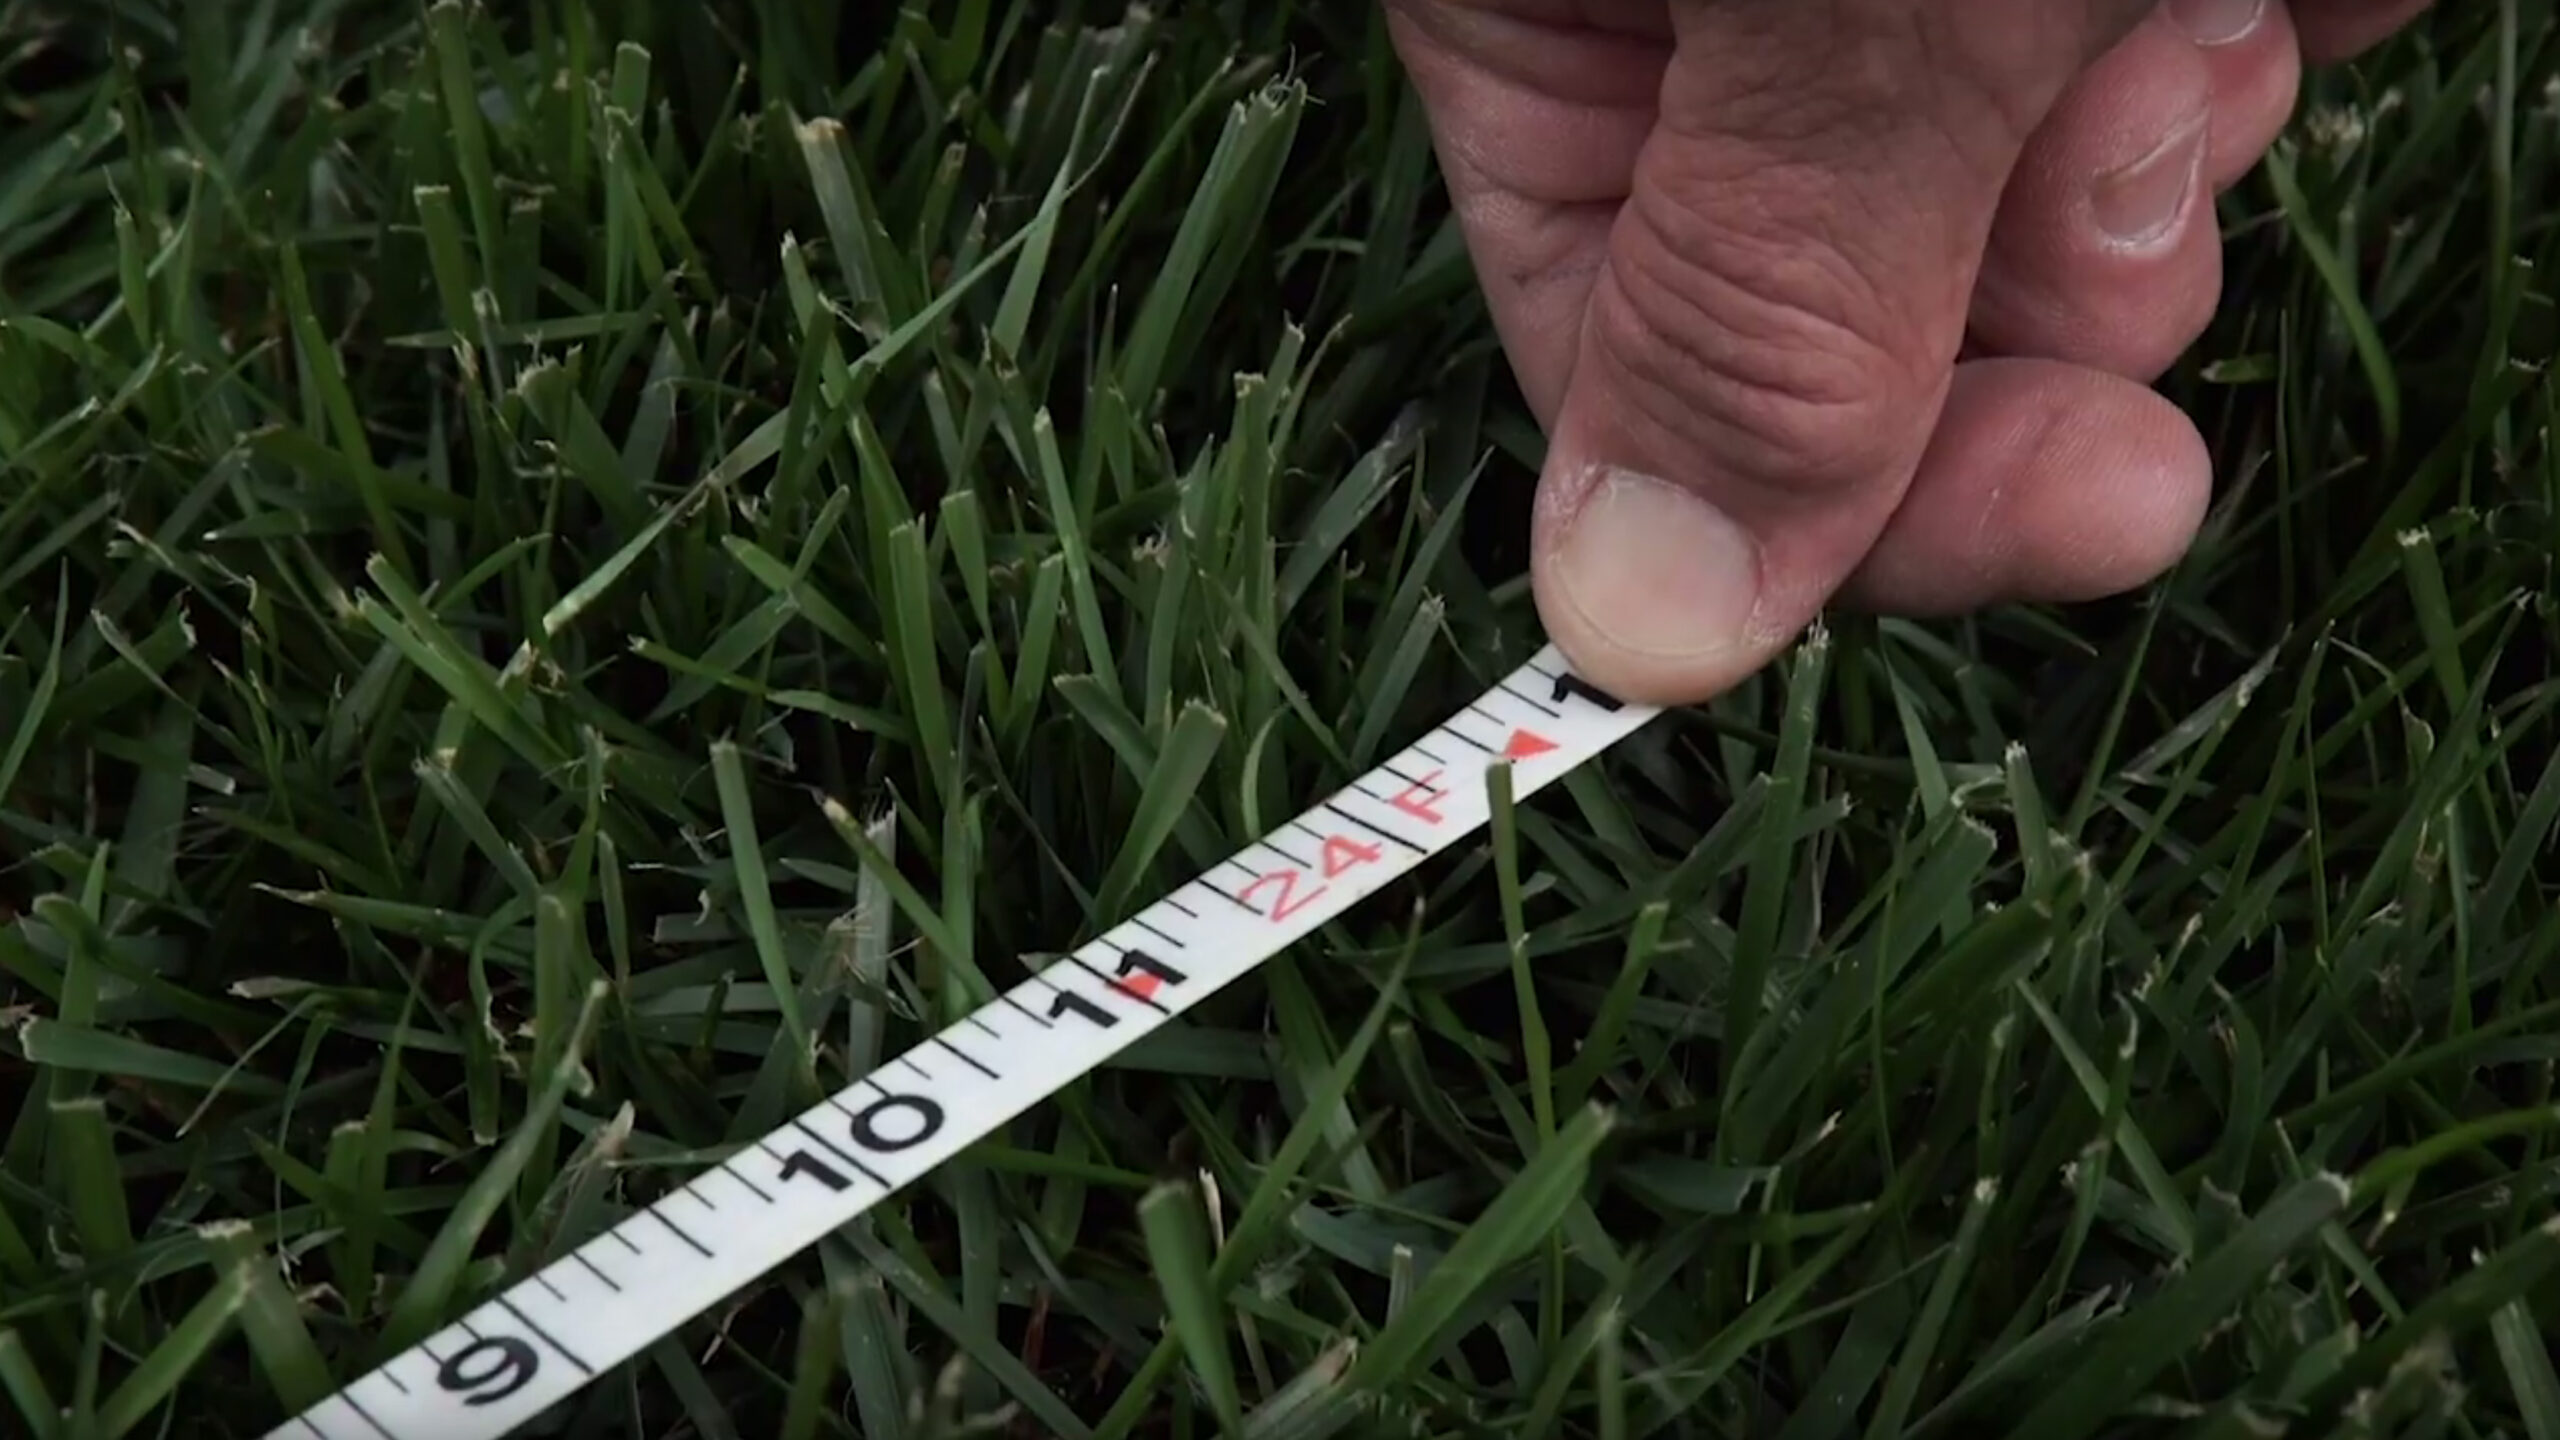 Hand holding a tape measure against grass in the lawn